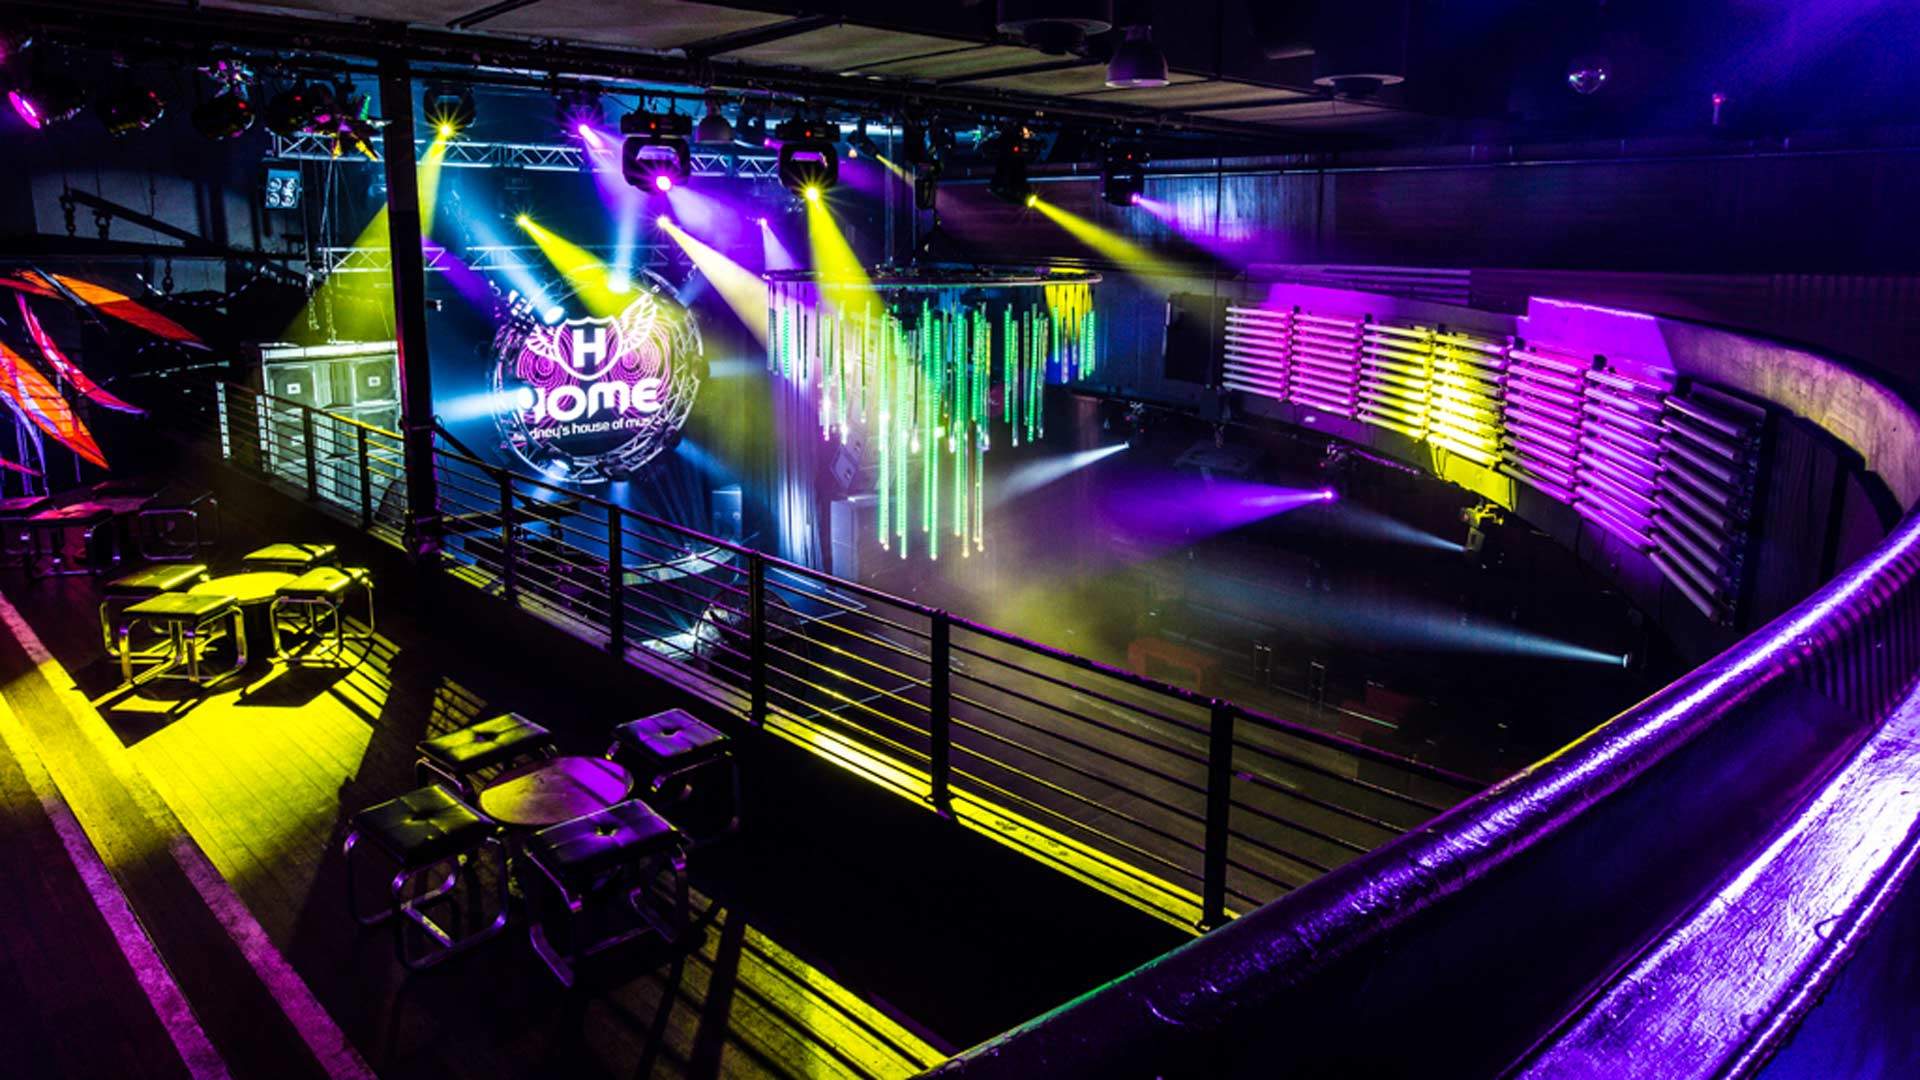 Home Nightclub Has Swapped the Dance Floor for Beds and Is Reopening in Time for Mardi Gras